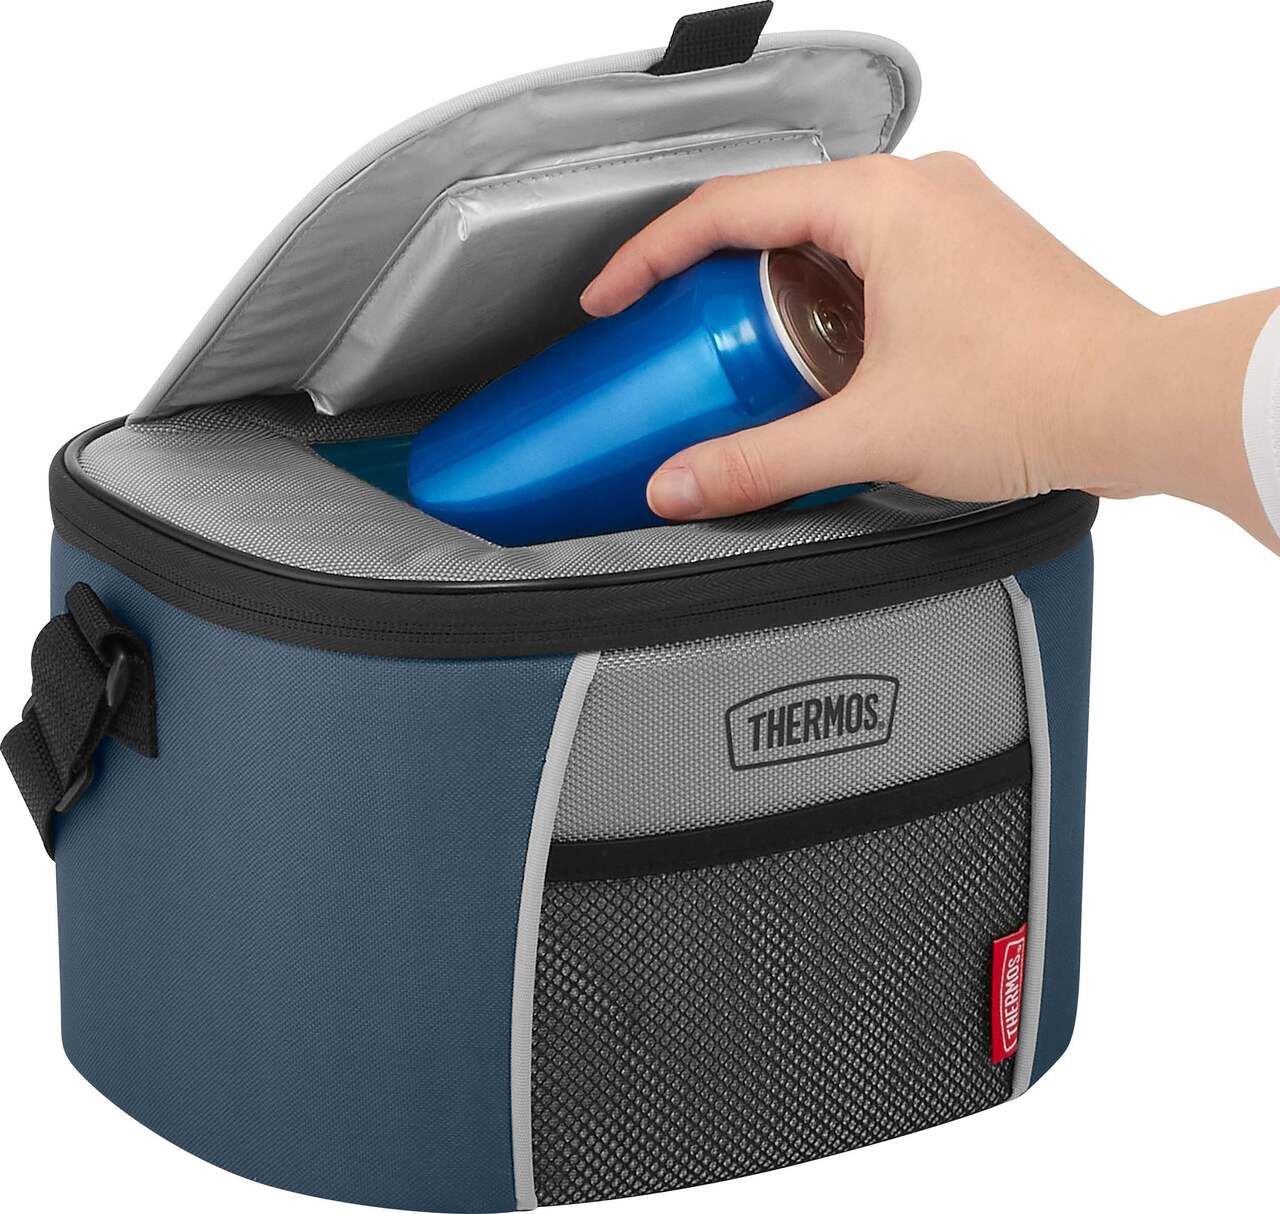 Thermos Eco Cool 6 Can Cooler Bag, 3L, Blue